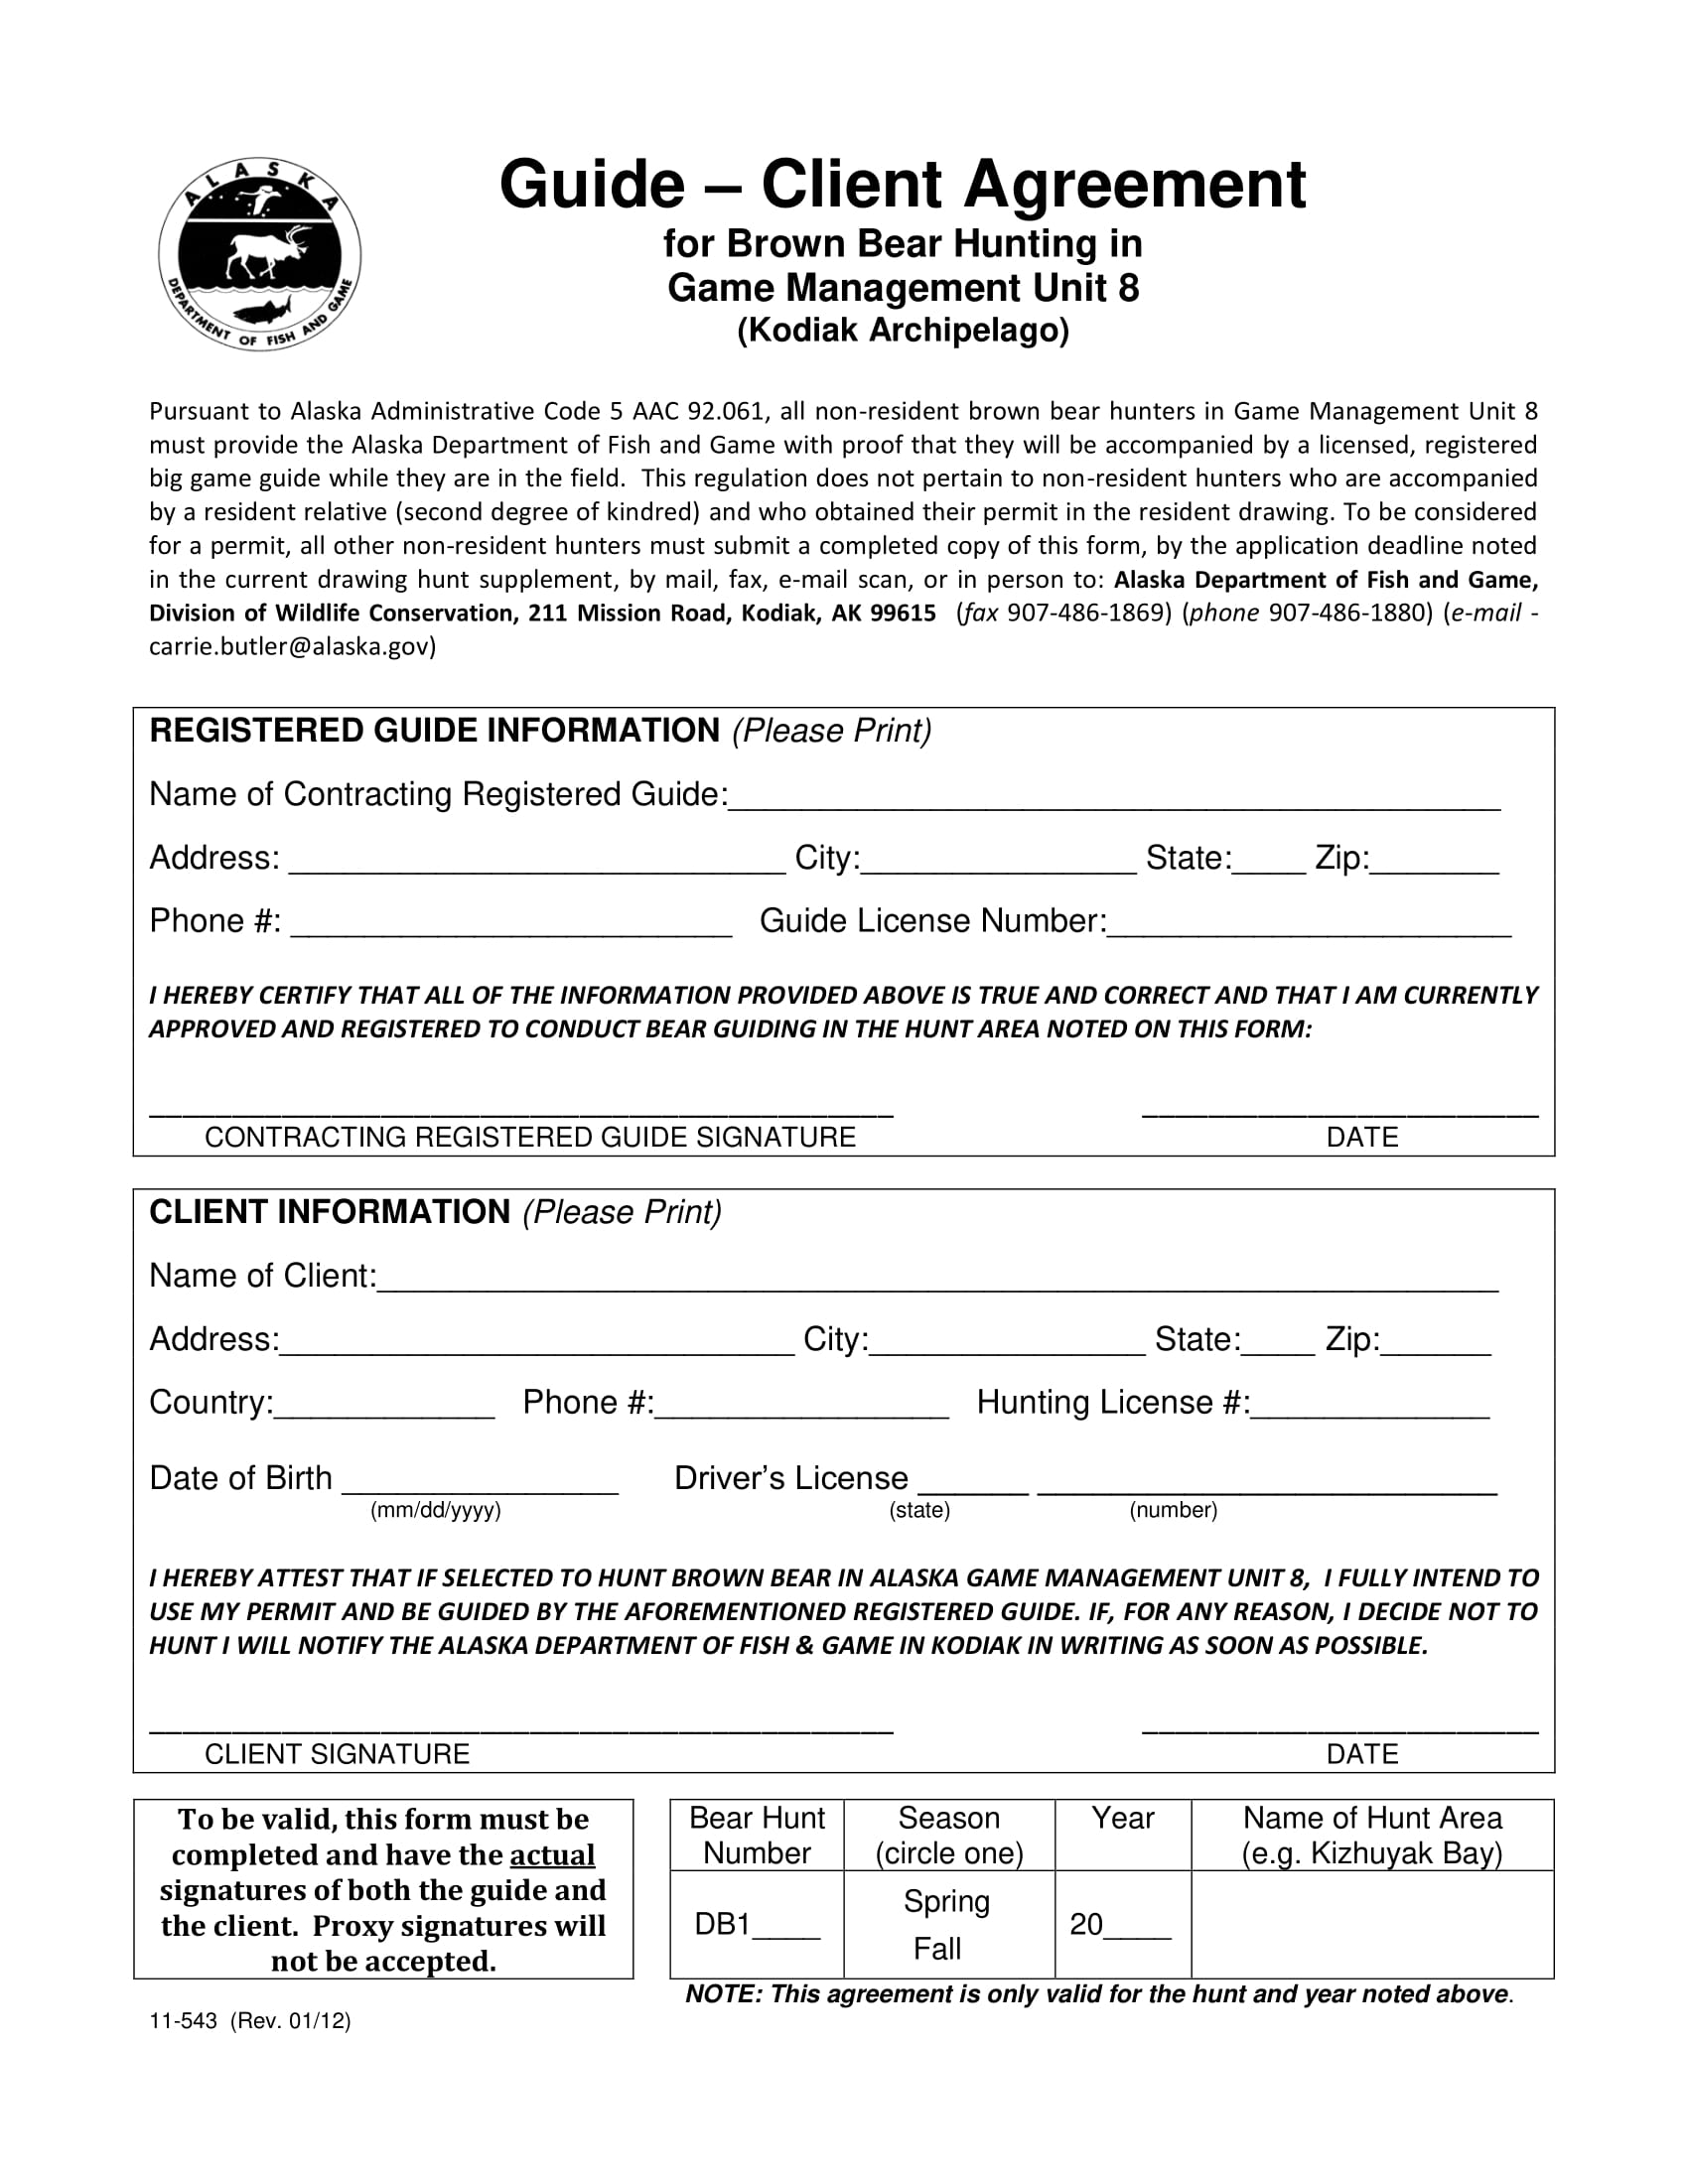 bear hunting client agreement contract form 1